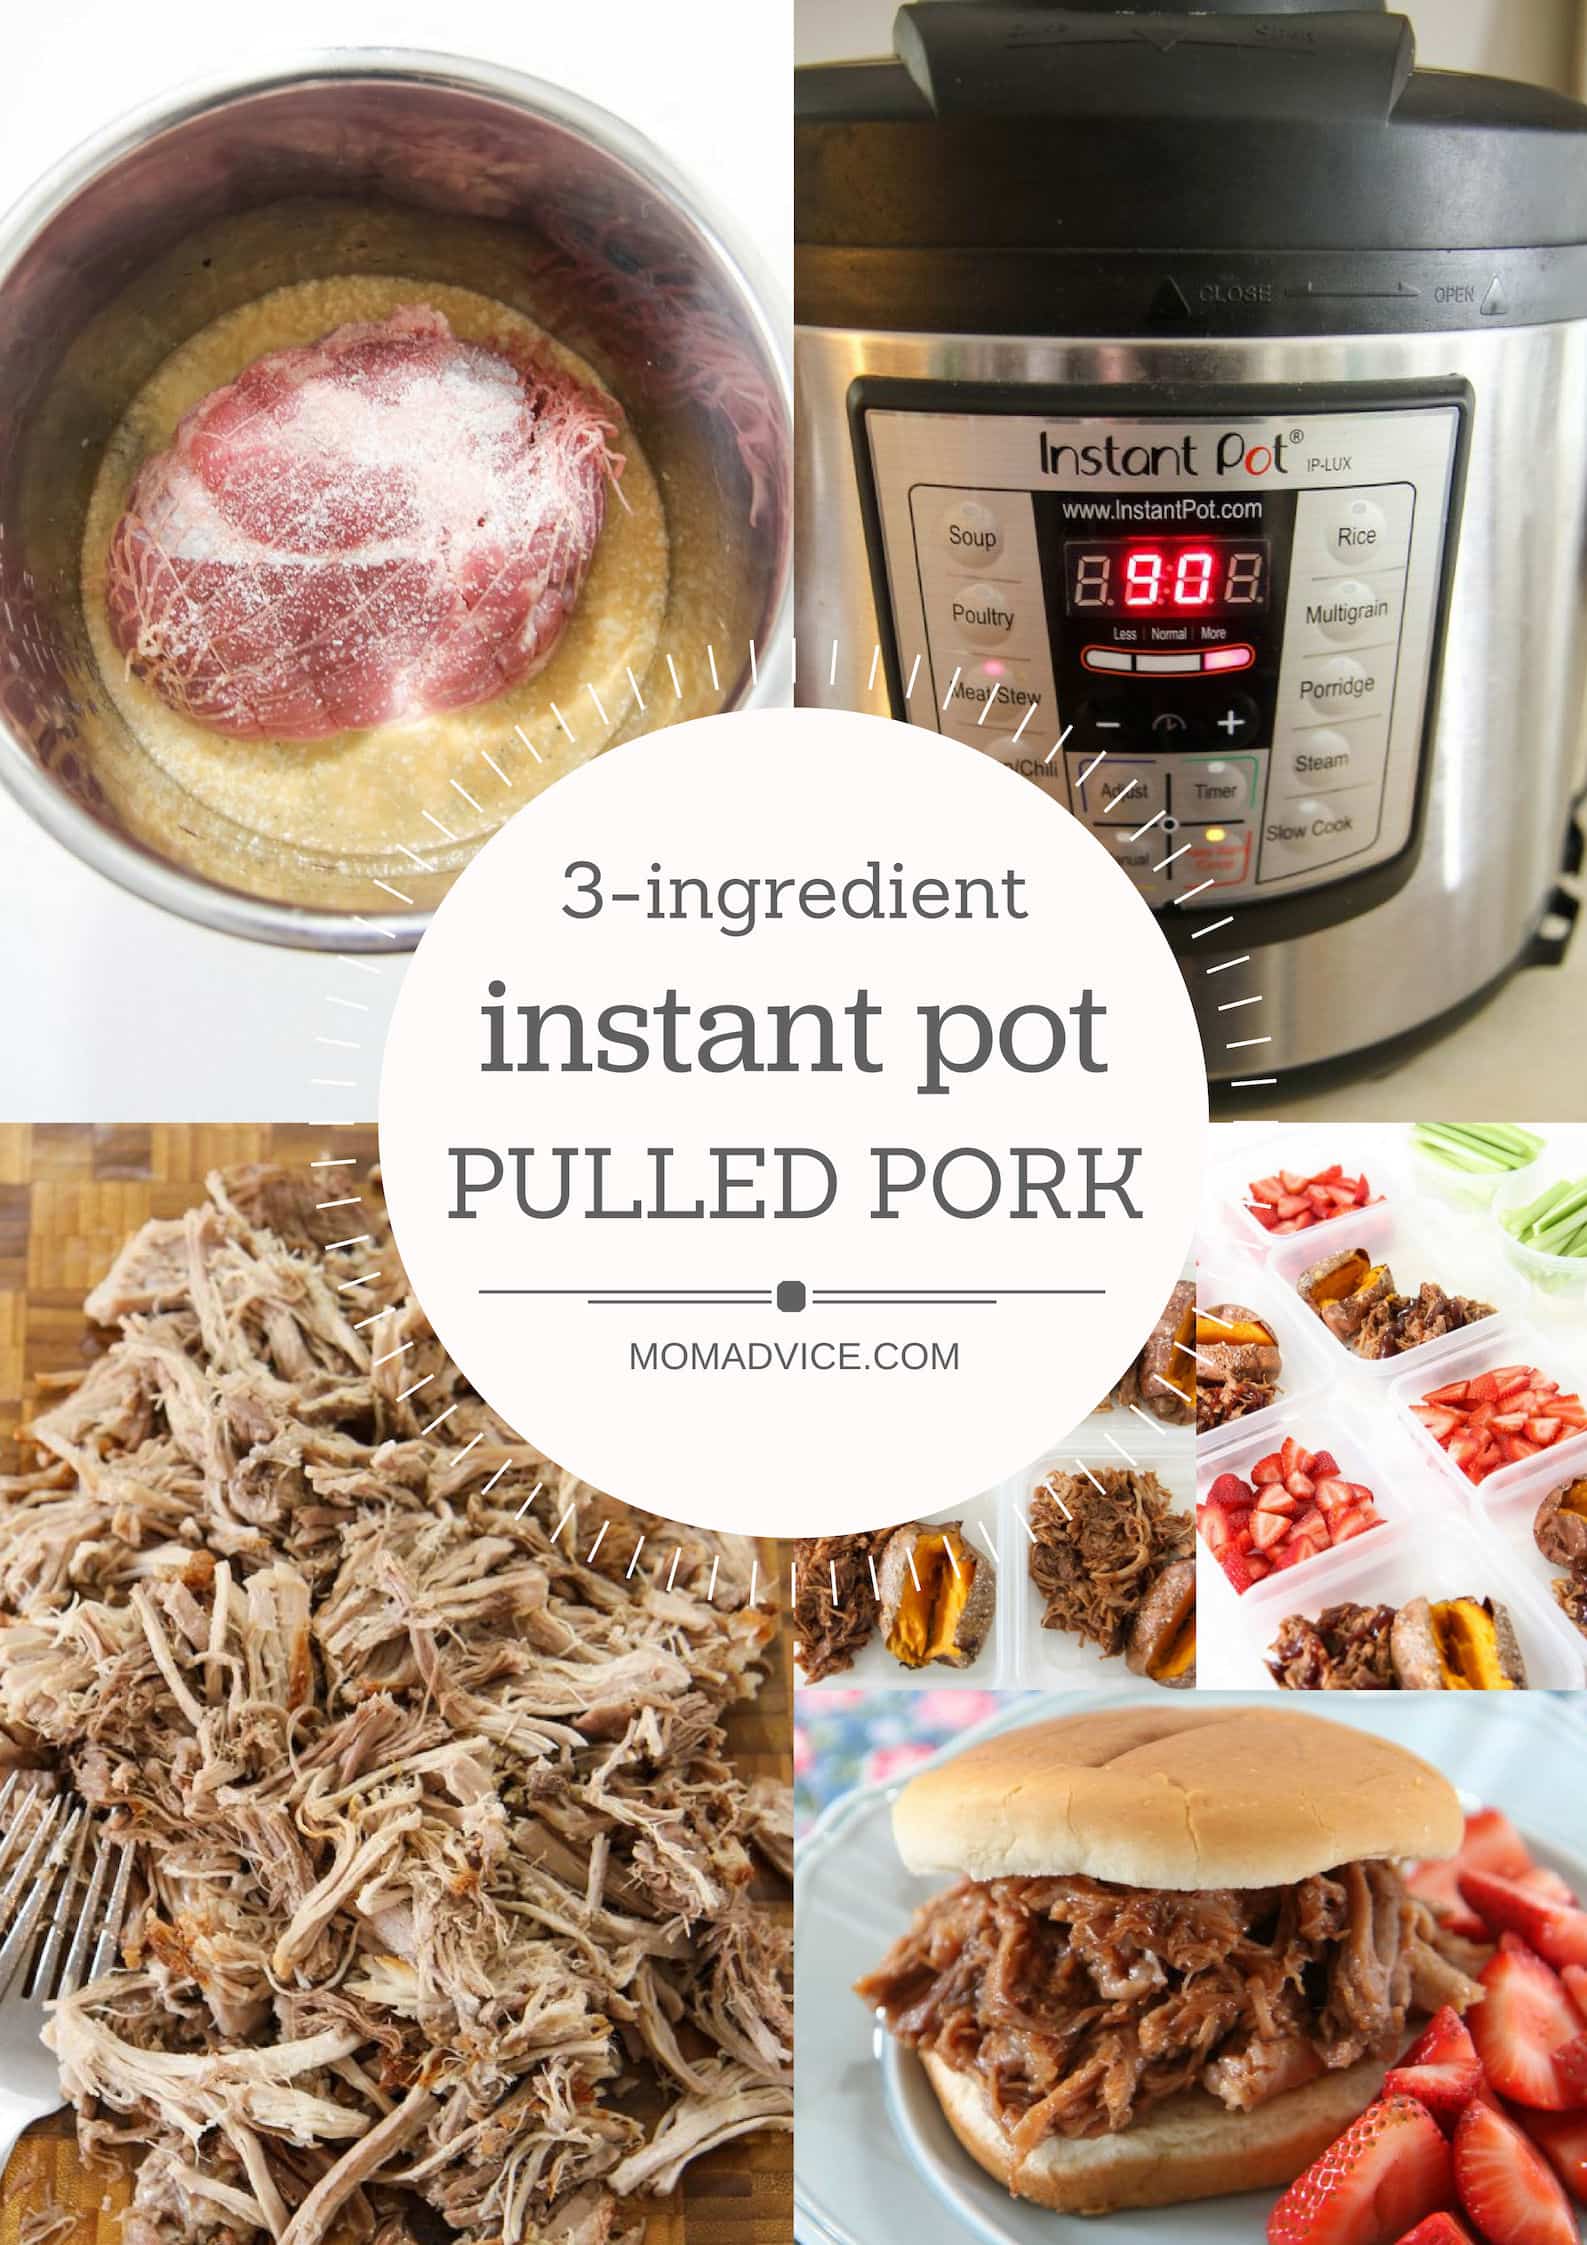 3-Ingredient Instant Pot Pulled Pork from MomAdvice.com